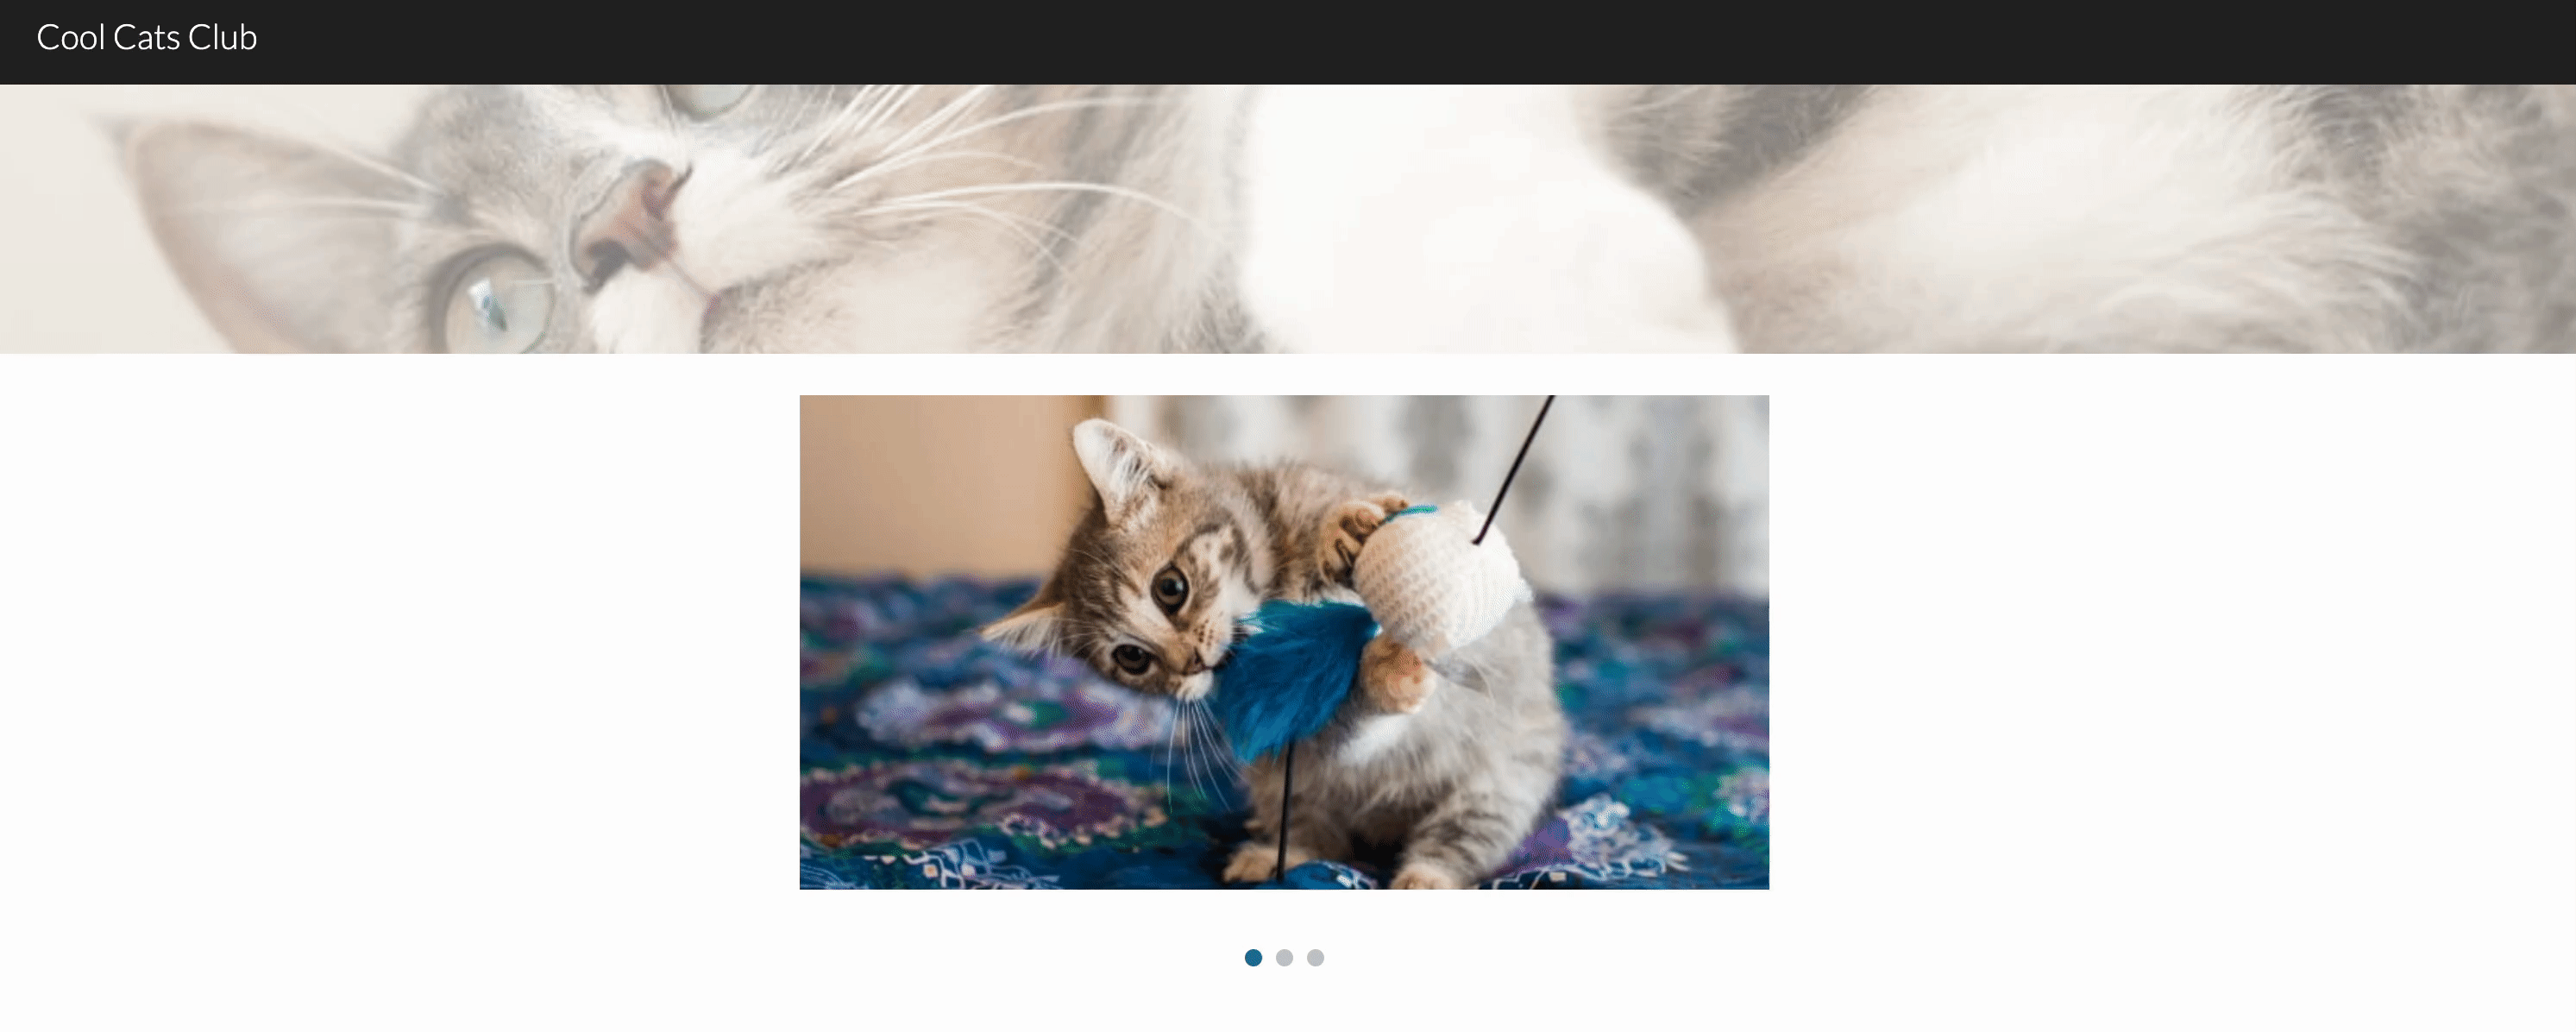 Demo of an image carousel automatically cycling through photos in a Google Sites website preview.